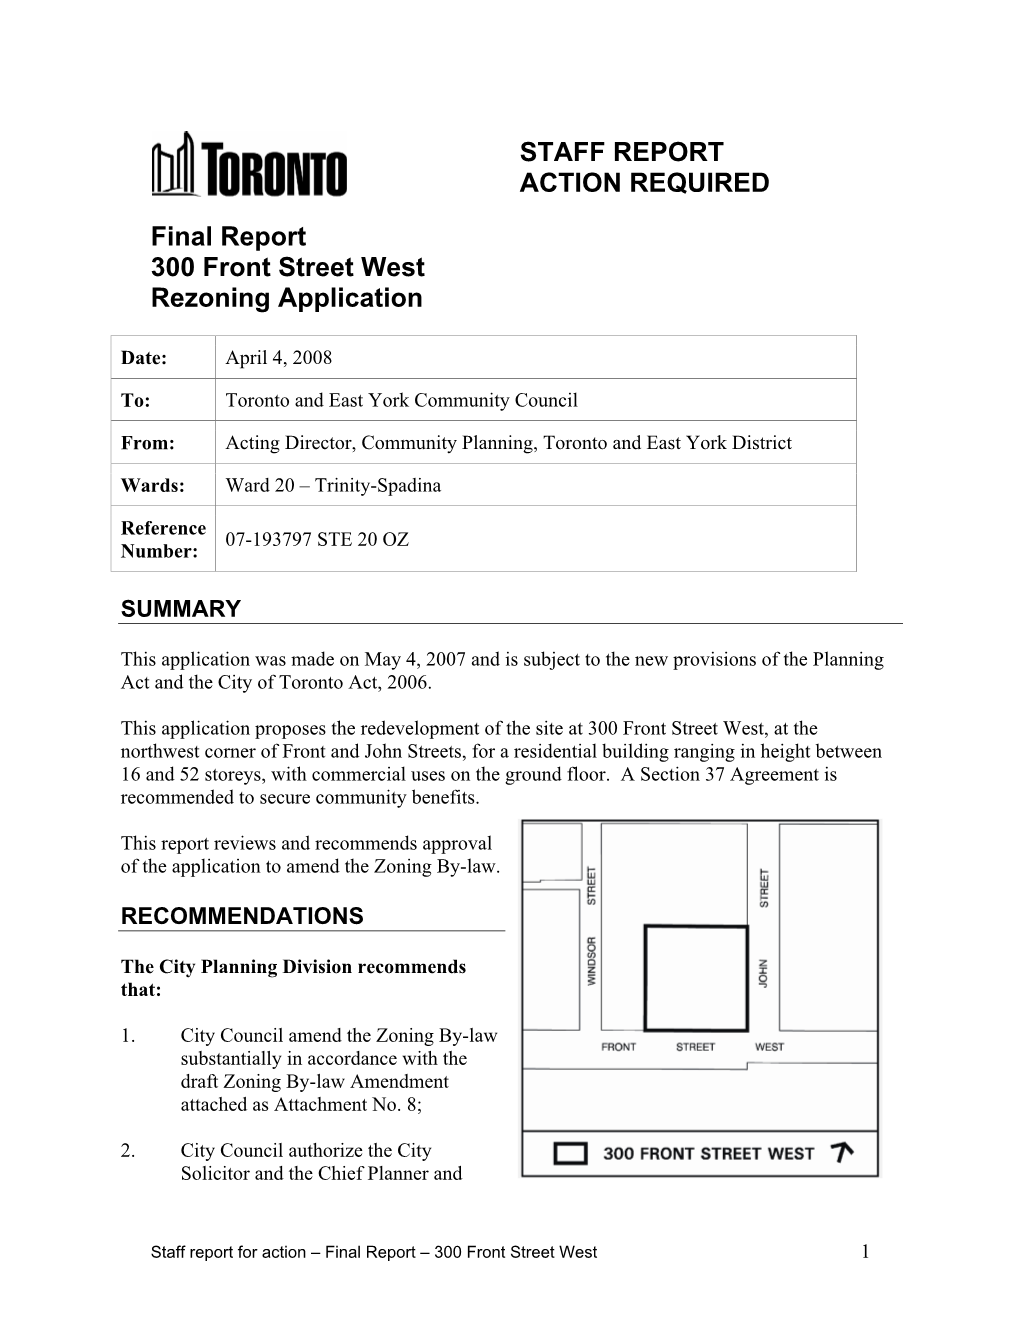 Final Report 300 Front Street West Rezoning Application